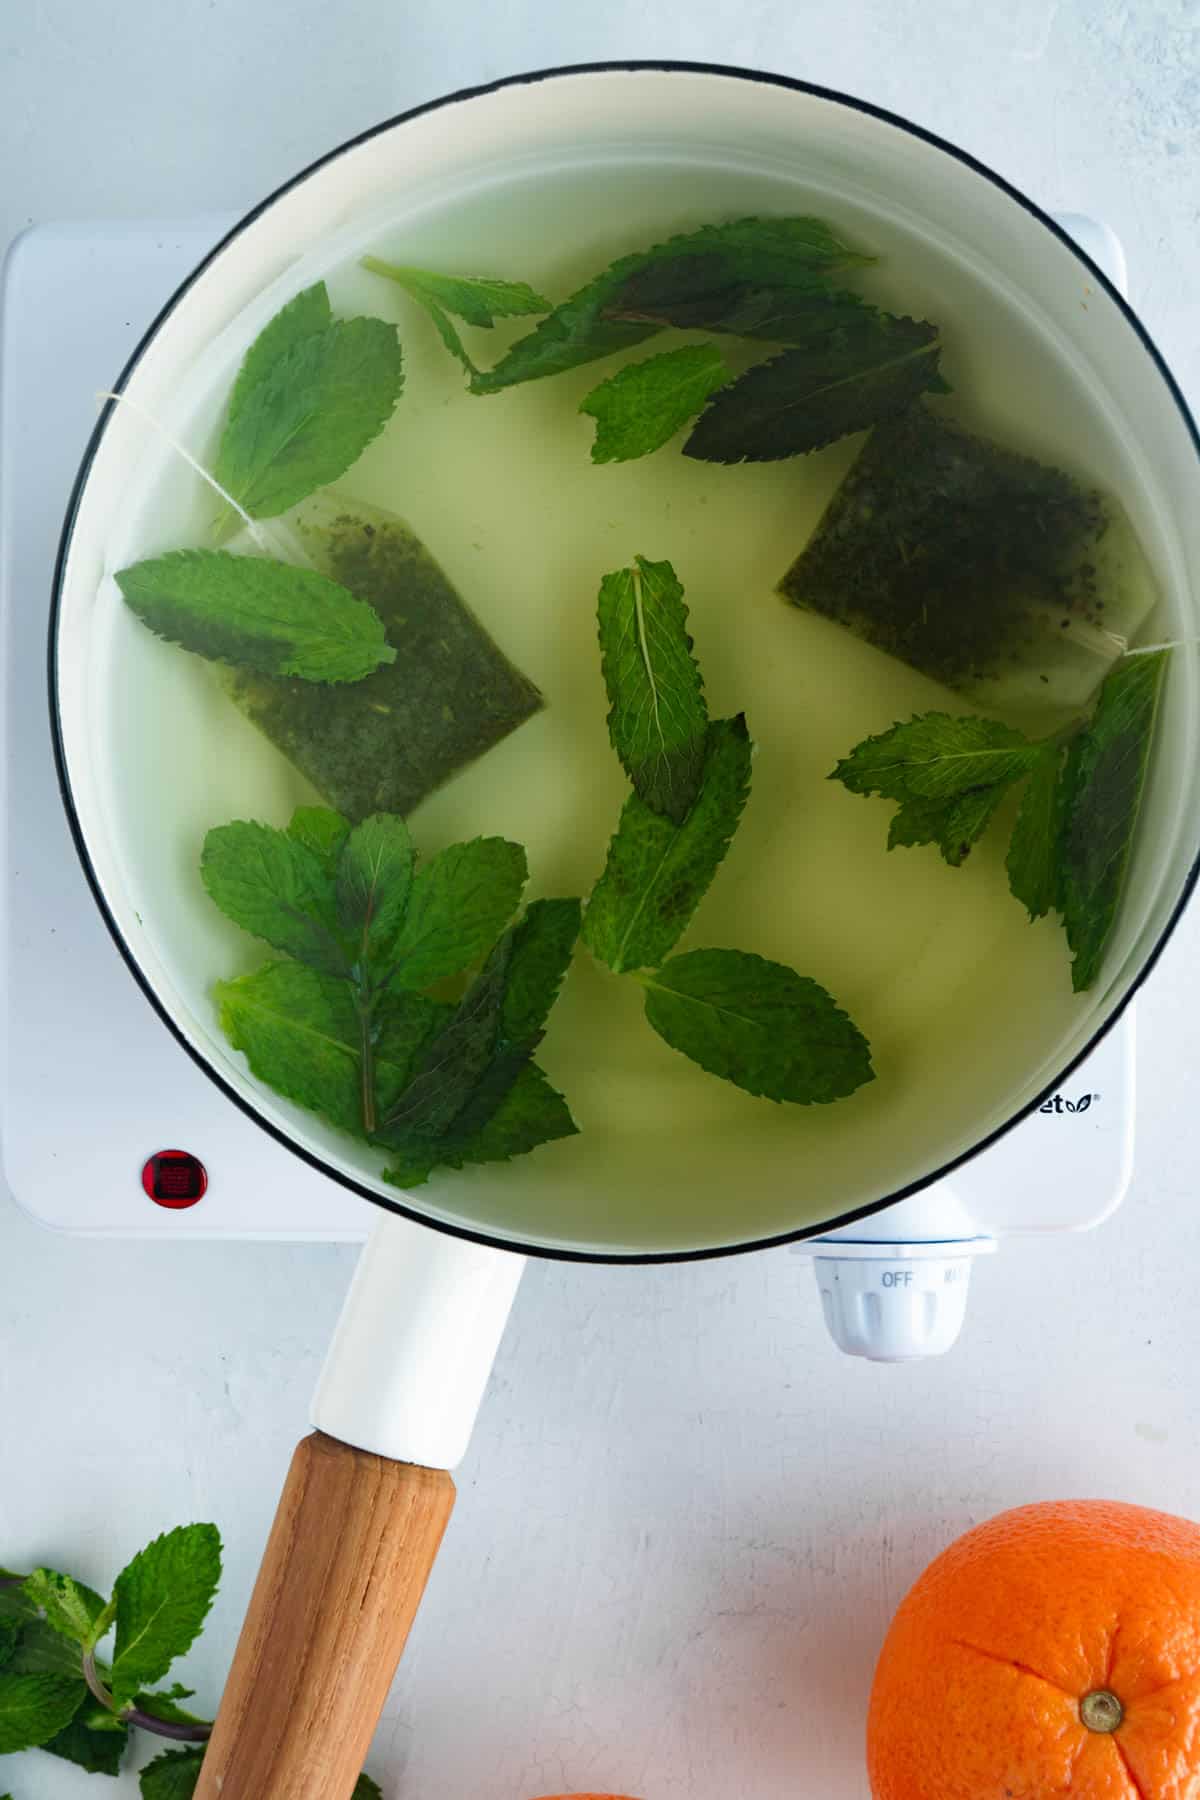 Green tea bags and mint leaves simmering in a white saucepan next to an orange, and fresh mint.